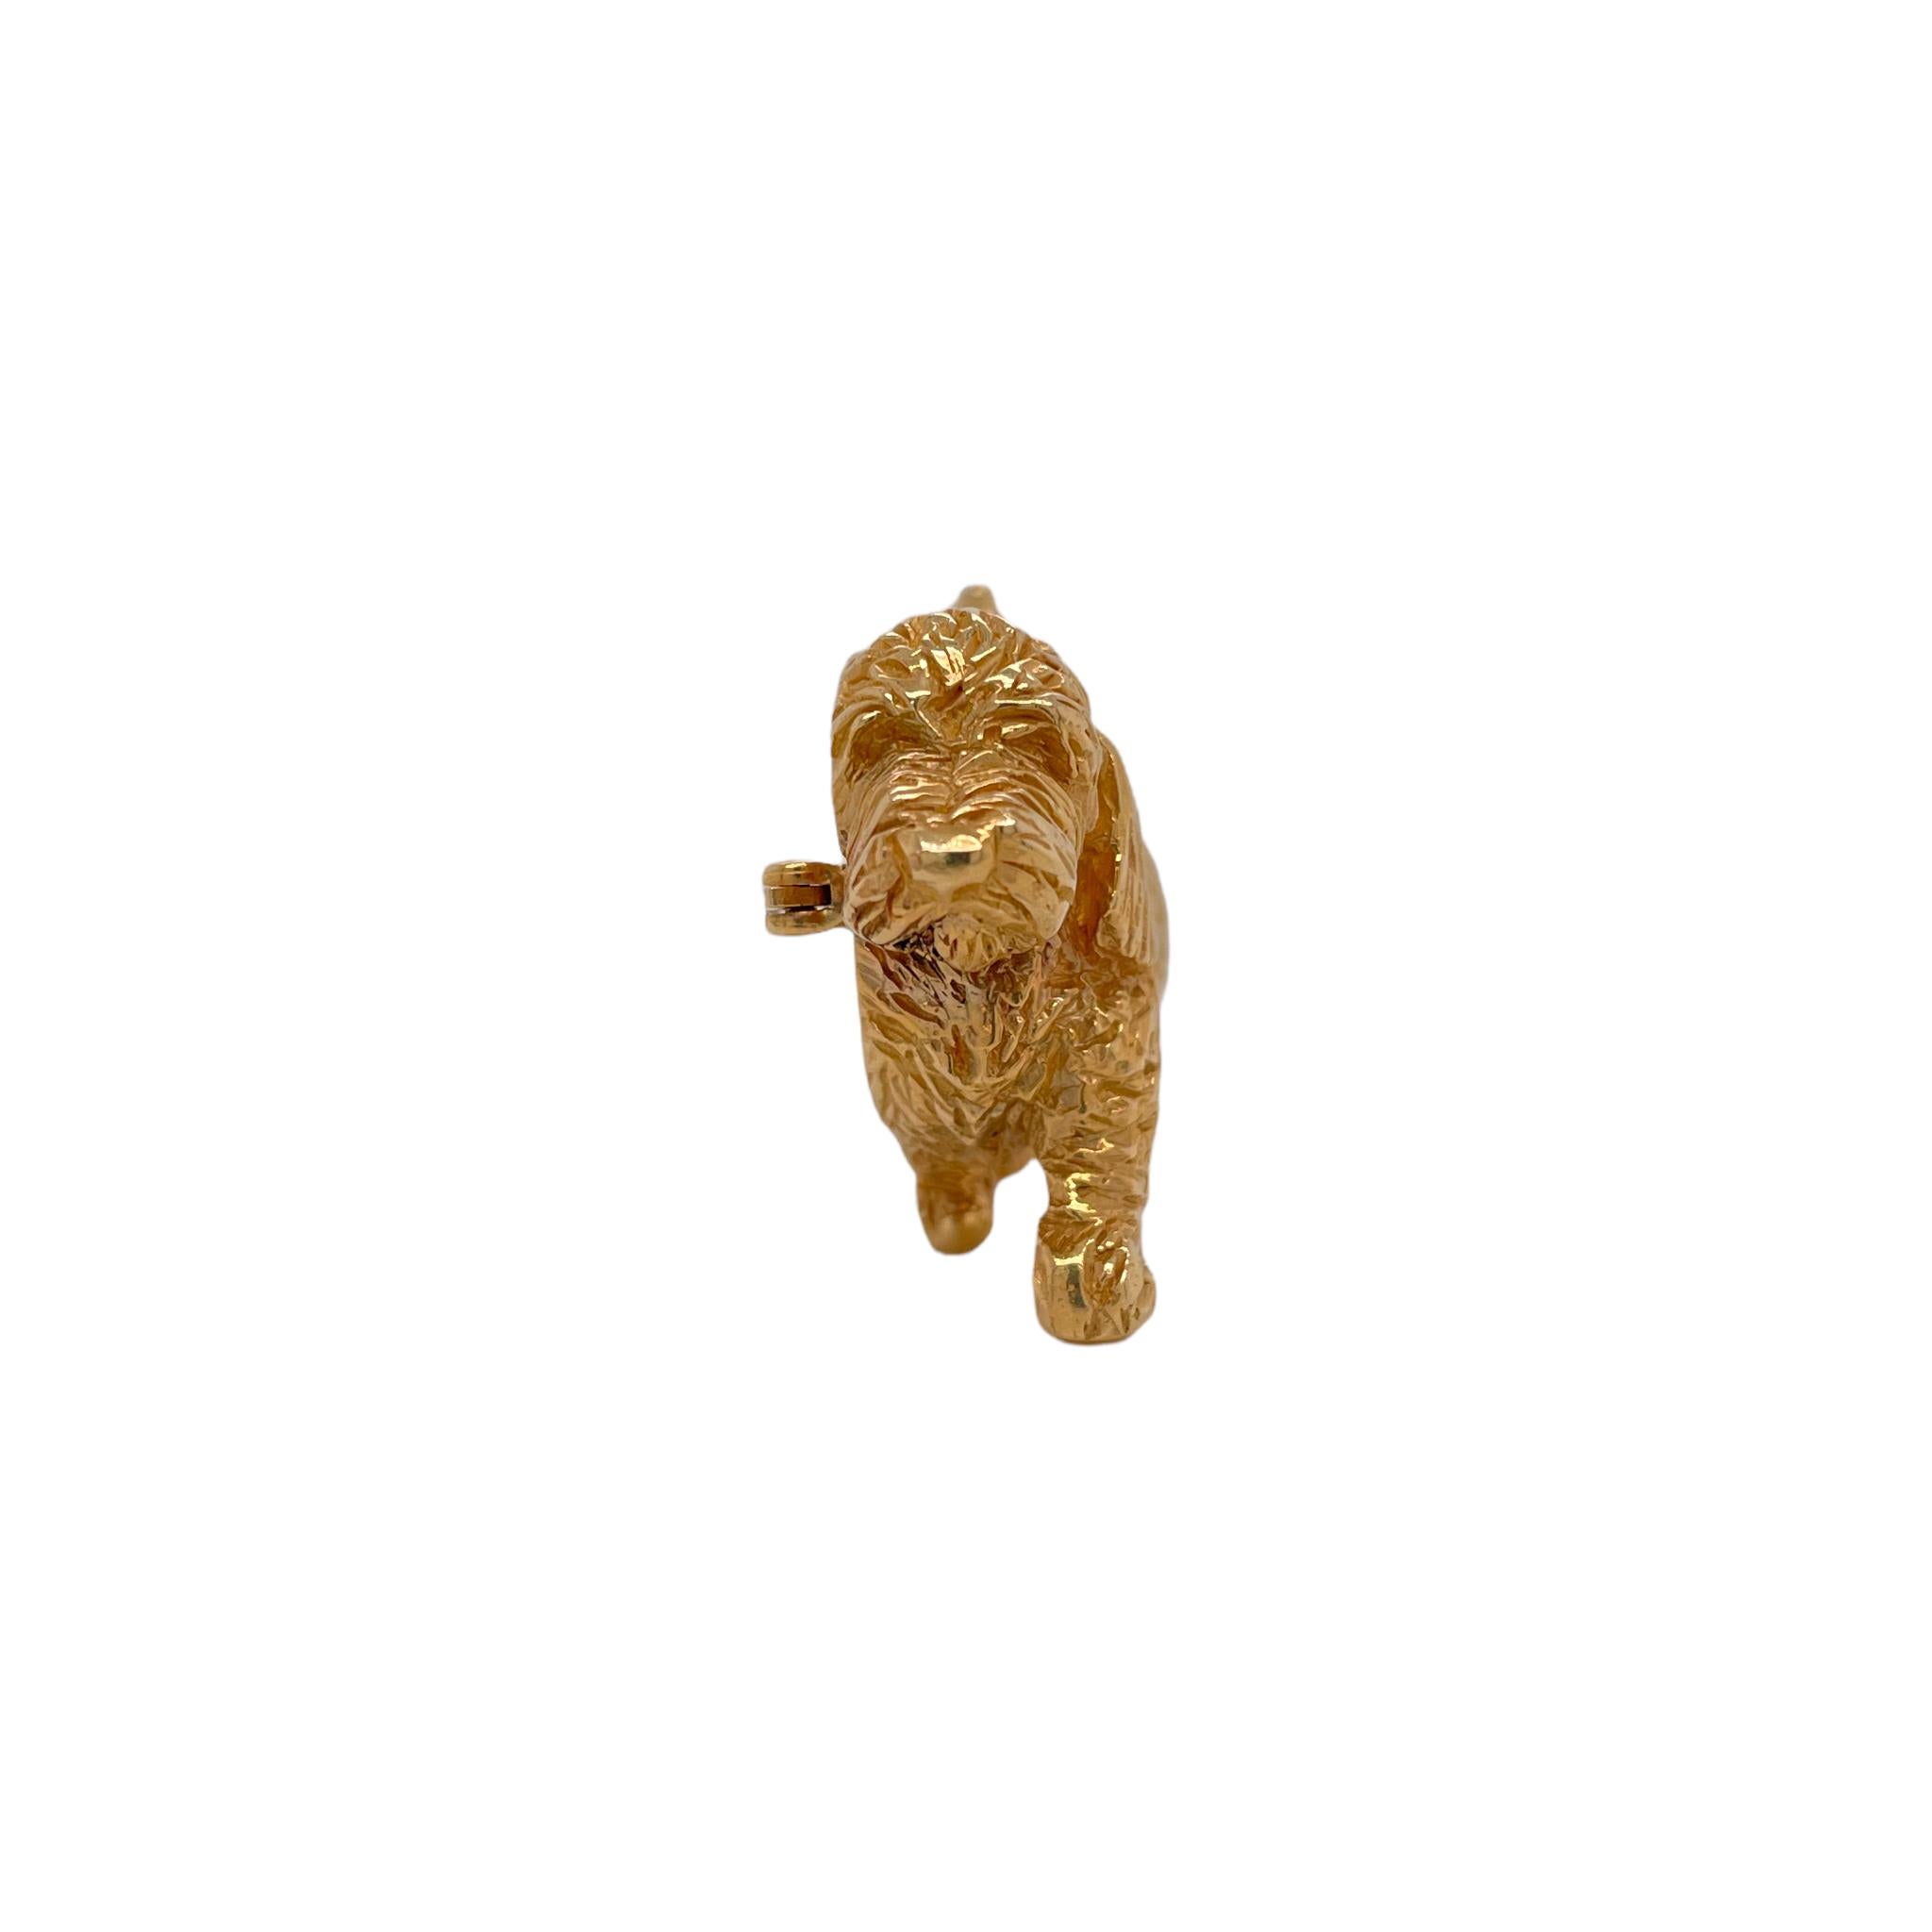 One of a kind 14k yellow gold, Golden Doodle, dog brooch. 
Brooch is approximately 1.5